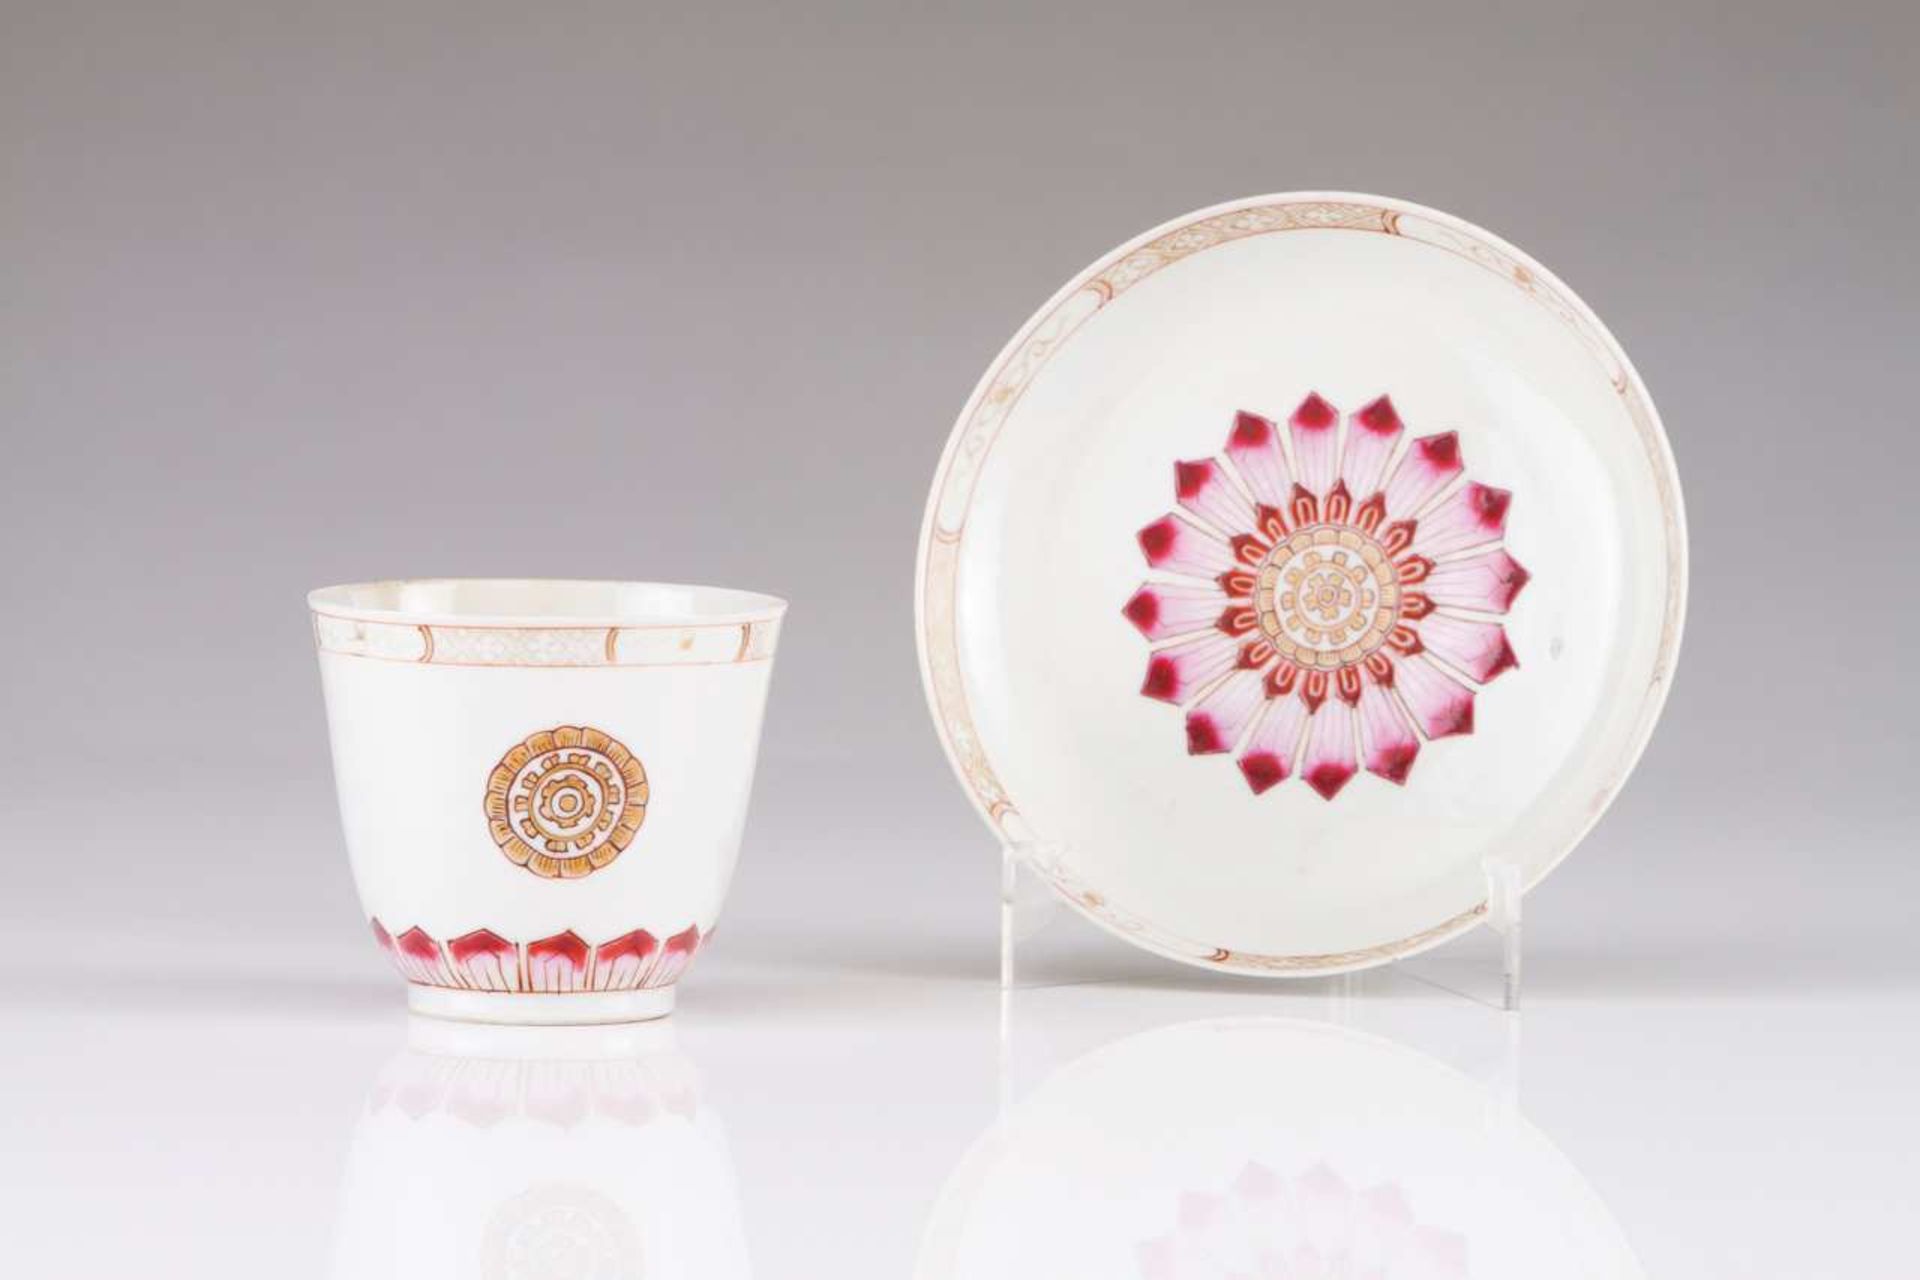 Cup and saucer Chinese export porcelain Polychrome and gilt decoration depicting floral motifs